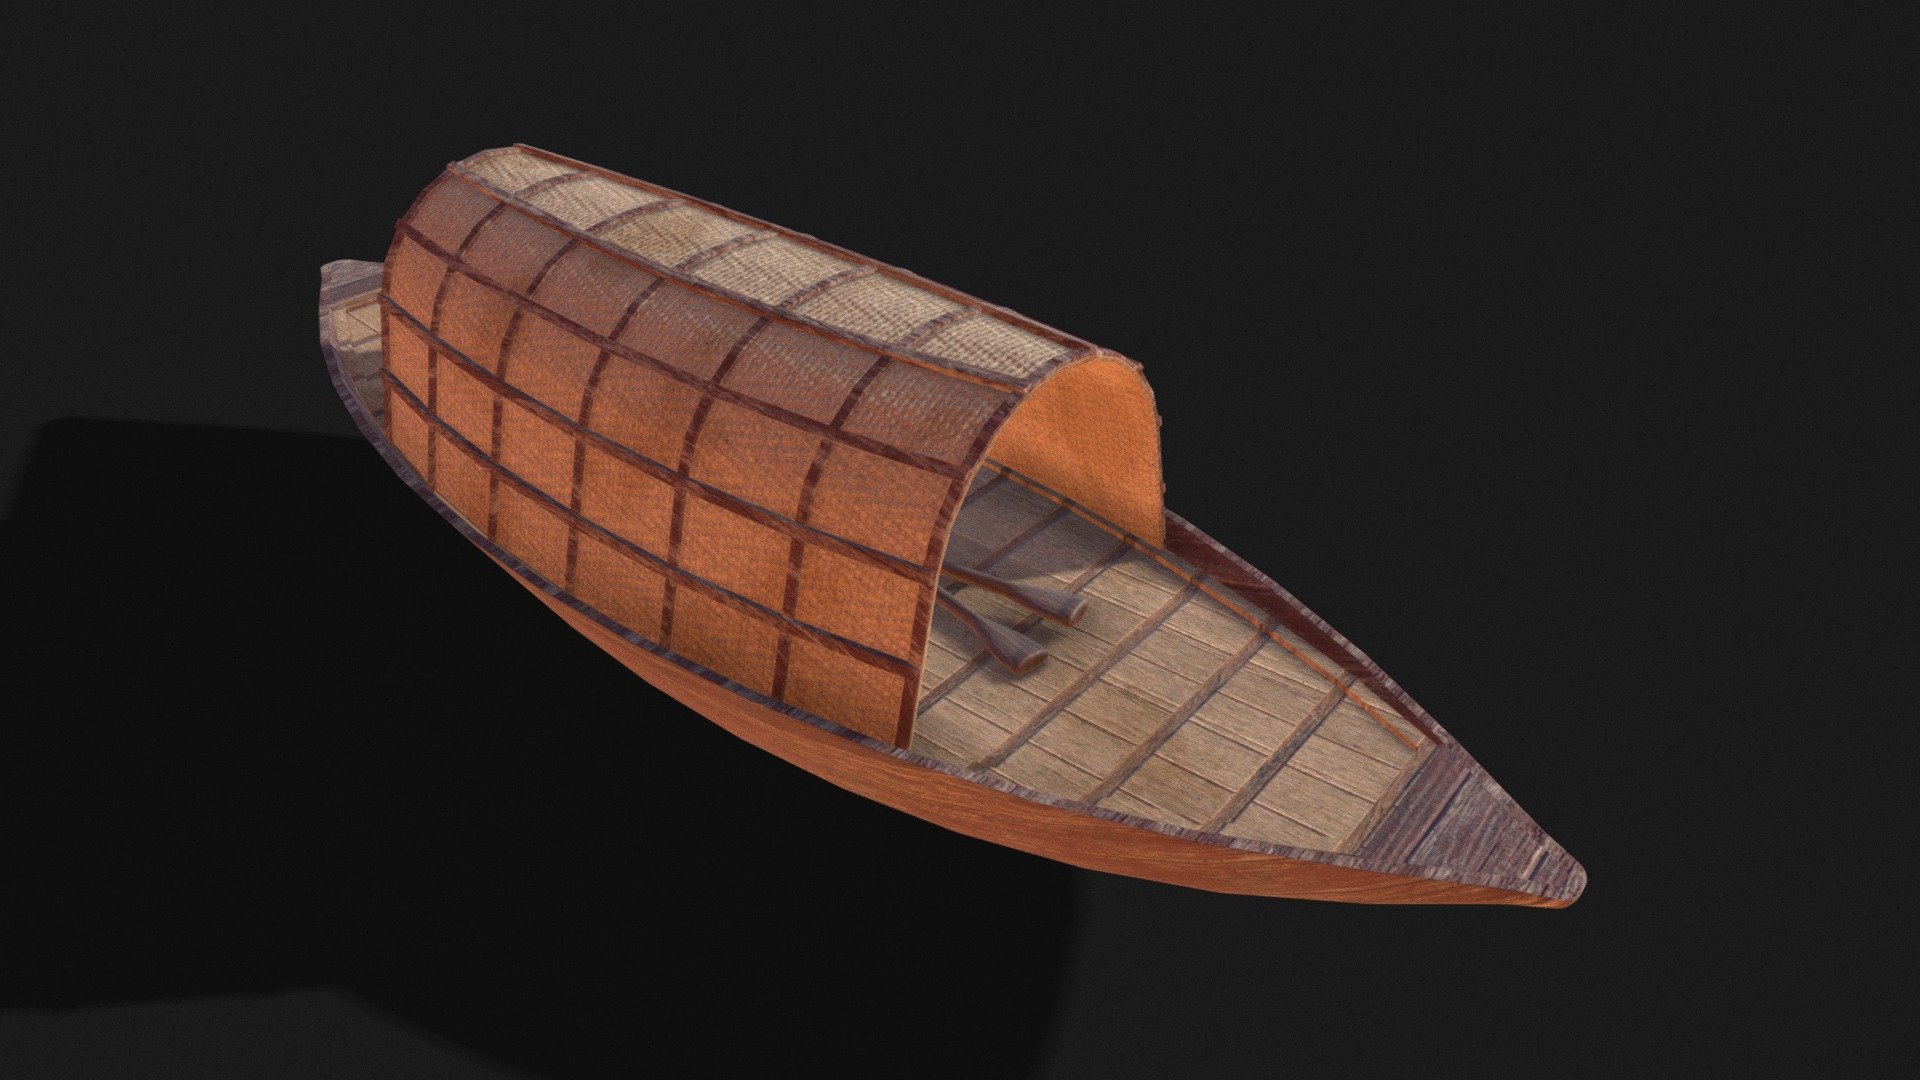 (Note : This model is just a preview, Good topology and lowpoly 3D model “PBR Lowpoly Wooden Boat V.3 Game Ready” are packed in Additional File Below)

PBR Lowpoly Wooden Boat V.3 ArchiViz and Game Ready 3D model for your 3d asset or 3d project it also suitable for any visual production, game assets, VR, AR, interior rendering, advertising, and illustration. made in blender 3.5 and rendered with Cycles render engine. With 5 different color maps, you can get creative and easly change the model color.

3D File Formats:

NOTE : All the texture (Texture Maps) are packed into a one Zip file called &ldquo;Textures